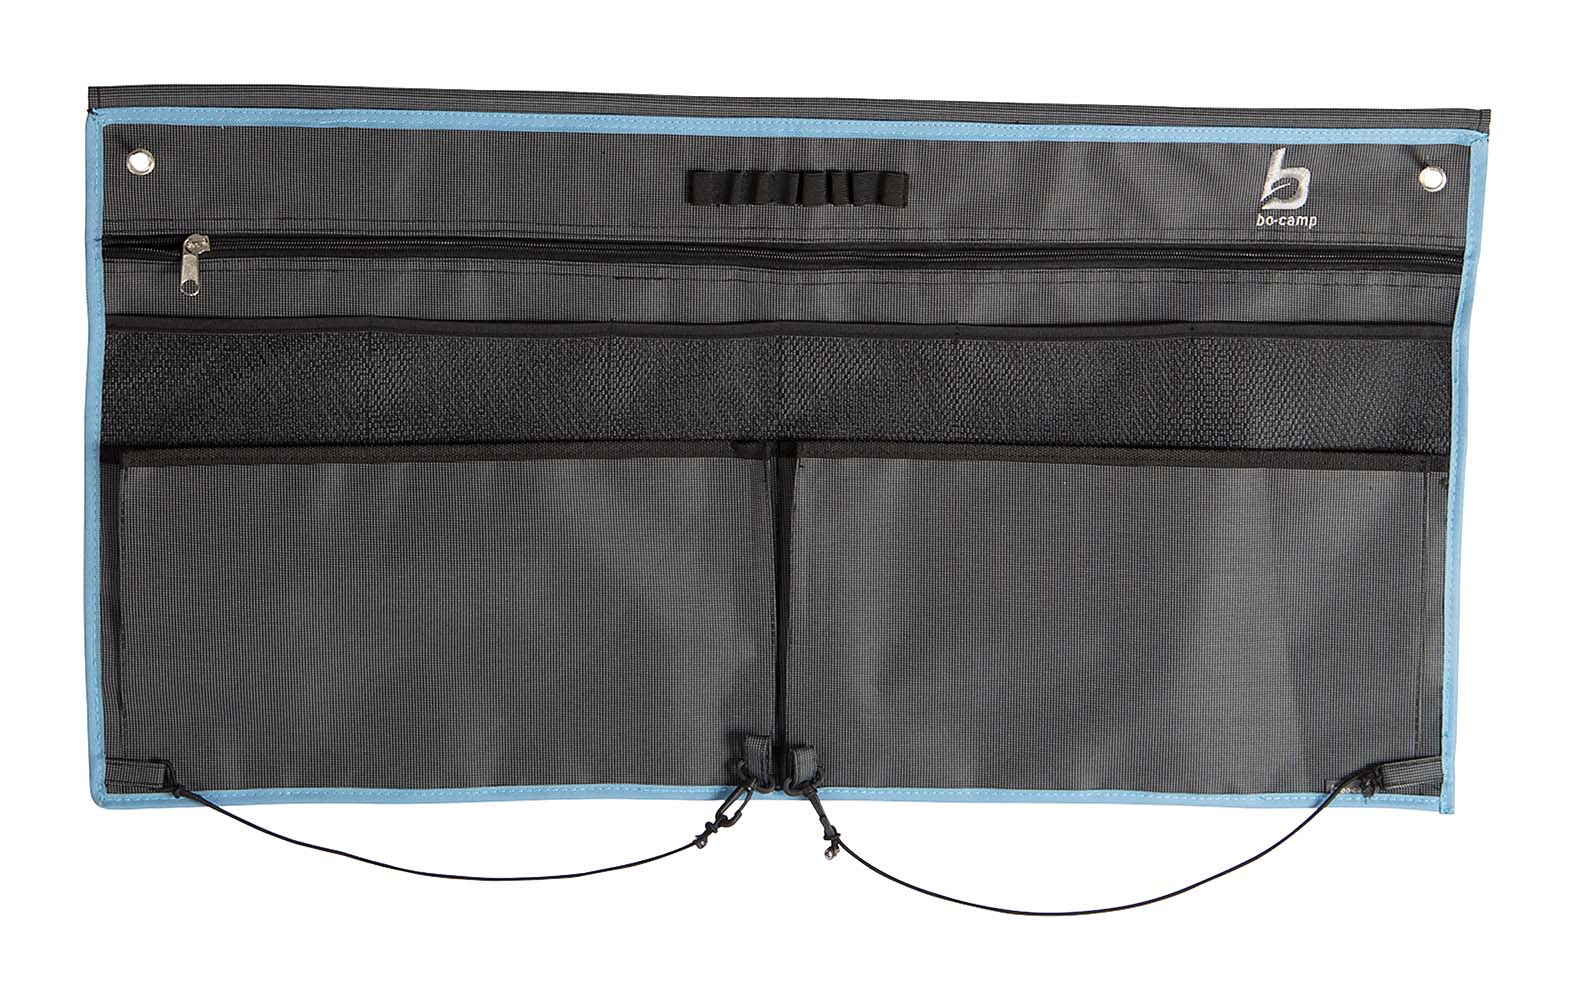 1771560 A multifunctional 9-compartments organizer. By means of a tendon, Velcro or suspension eyelets, this organizer is easy to attach. Ideal for the camper, caravan or tent. Equipped with 2 large front pockets, 6 mesh pockets and a zipper pocket. Includes elastic lines to hang up a cloth or a roll of paper.